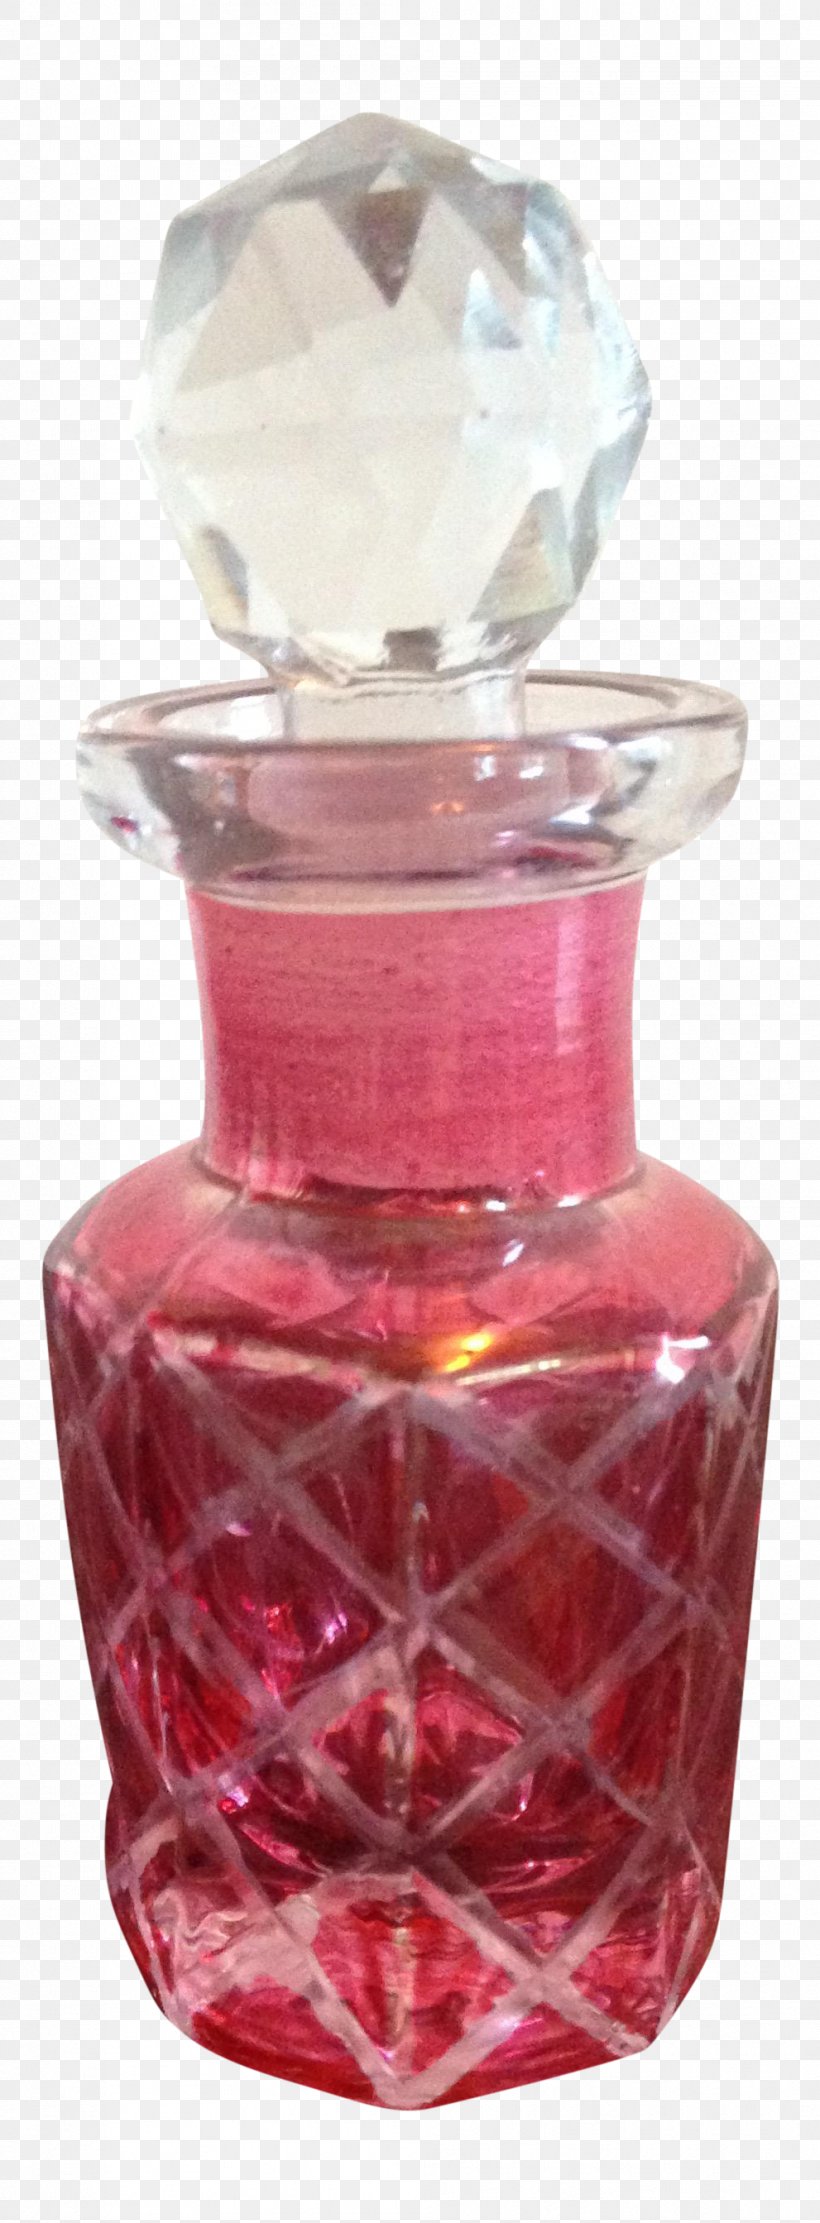 Perfume Glass Bottle Product, PNG, 991x2687px, Perfume, Bottle, Cosmetics, Glass, Glass Bottle Download Free